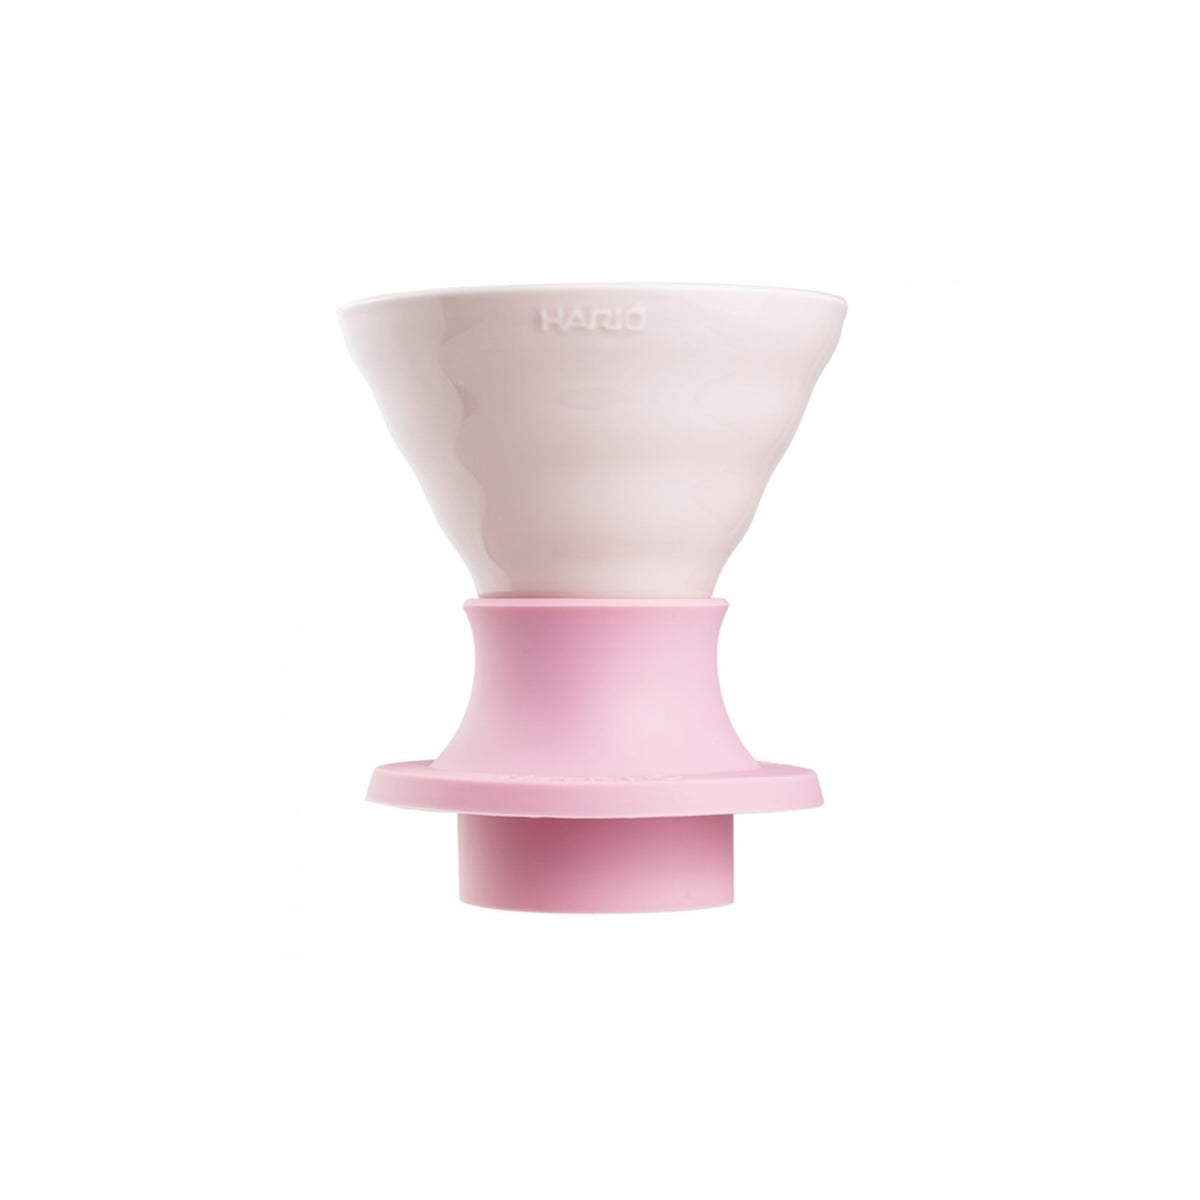 Hario Immersion Ceramic Dripper Switch 02 Candy Pink